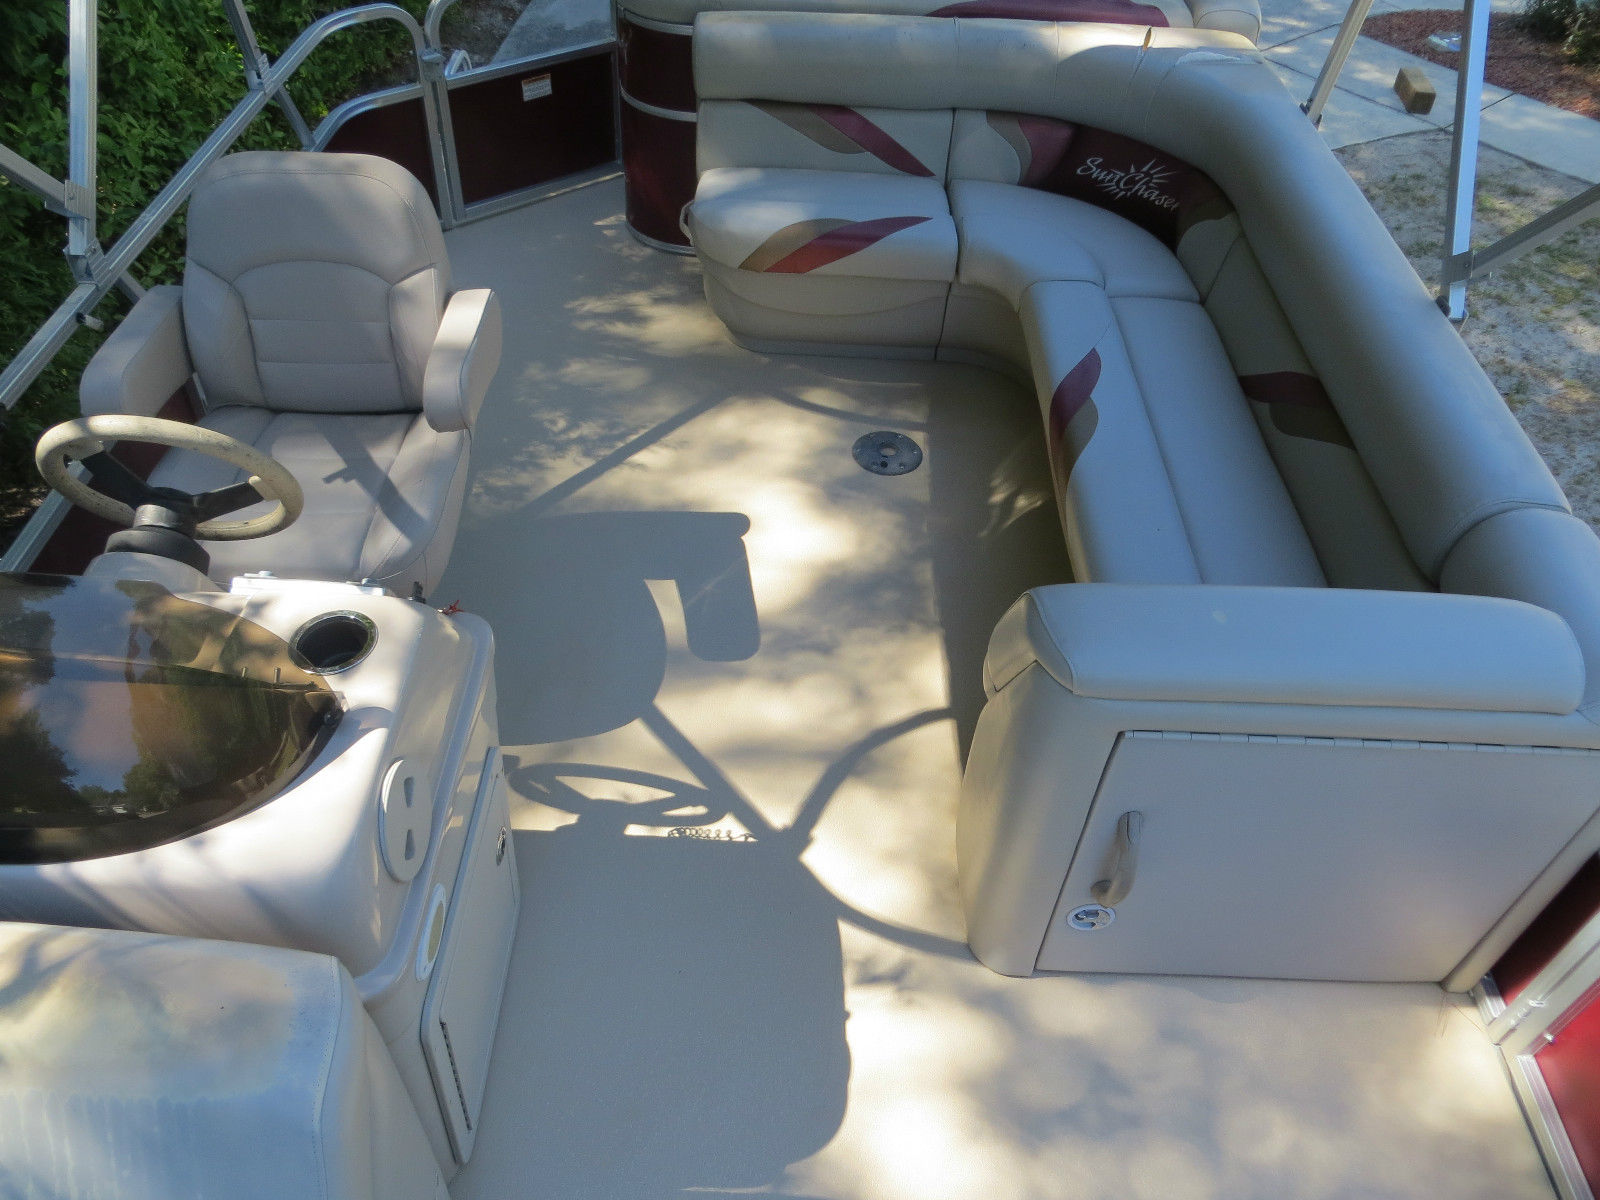 Smoker Craft Sun Chaser 22 Ft 2011 for sale for $13,900 